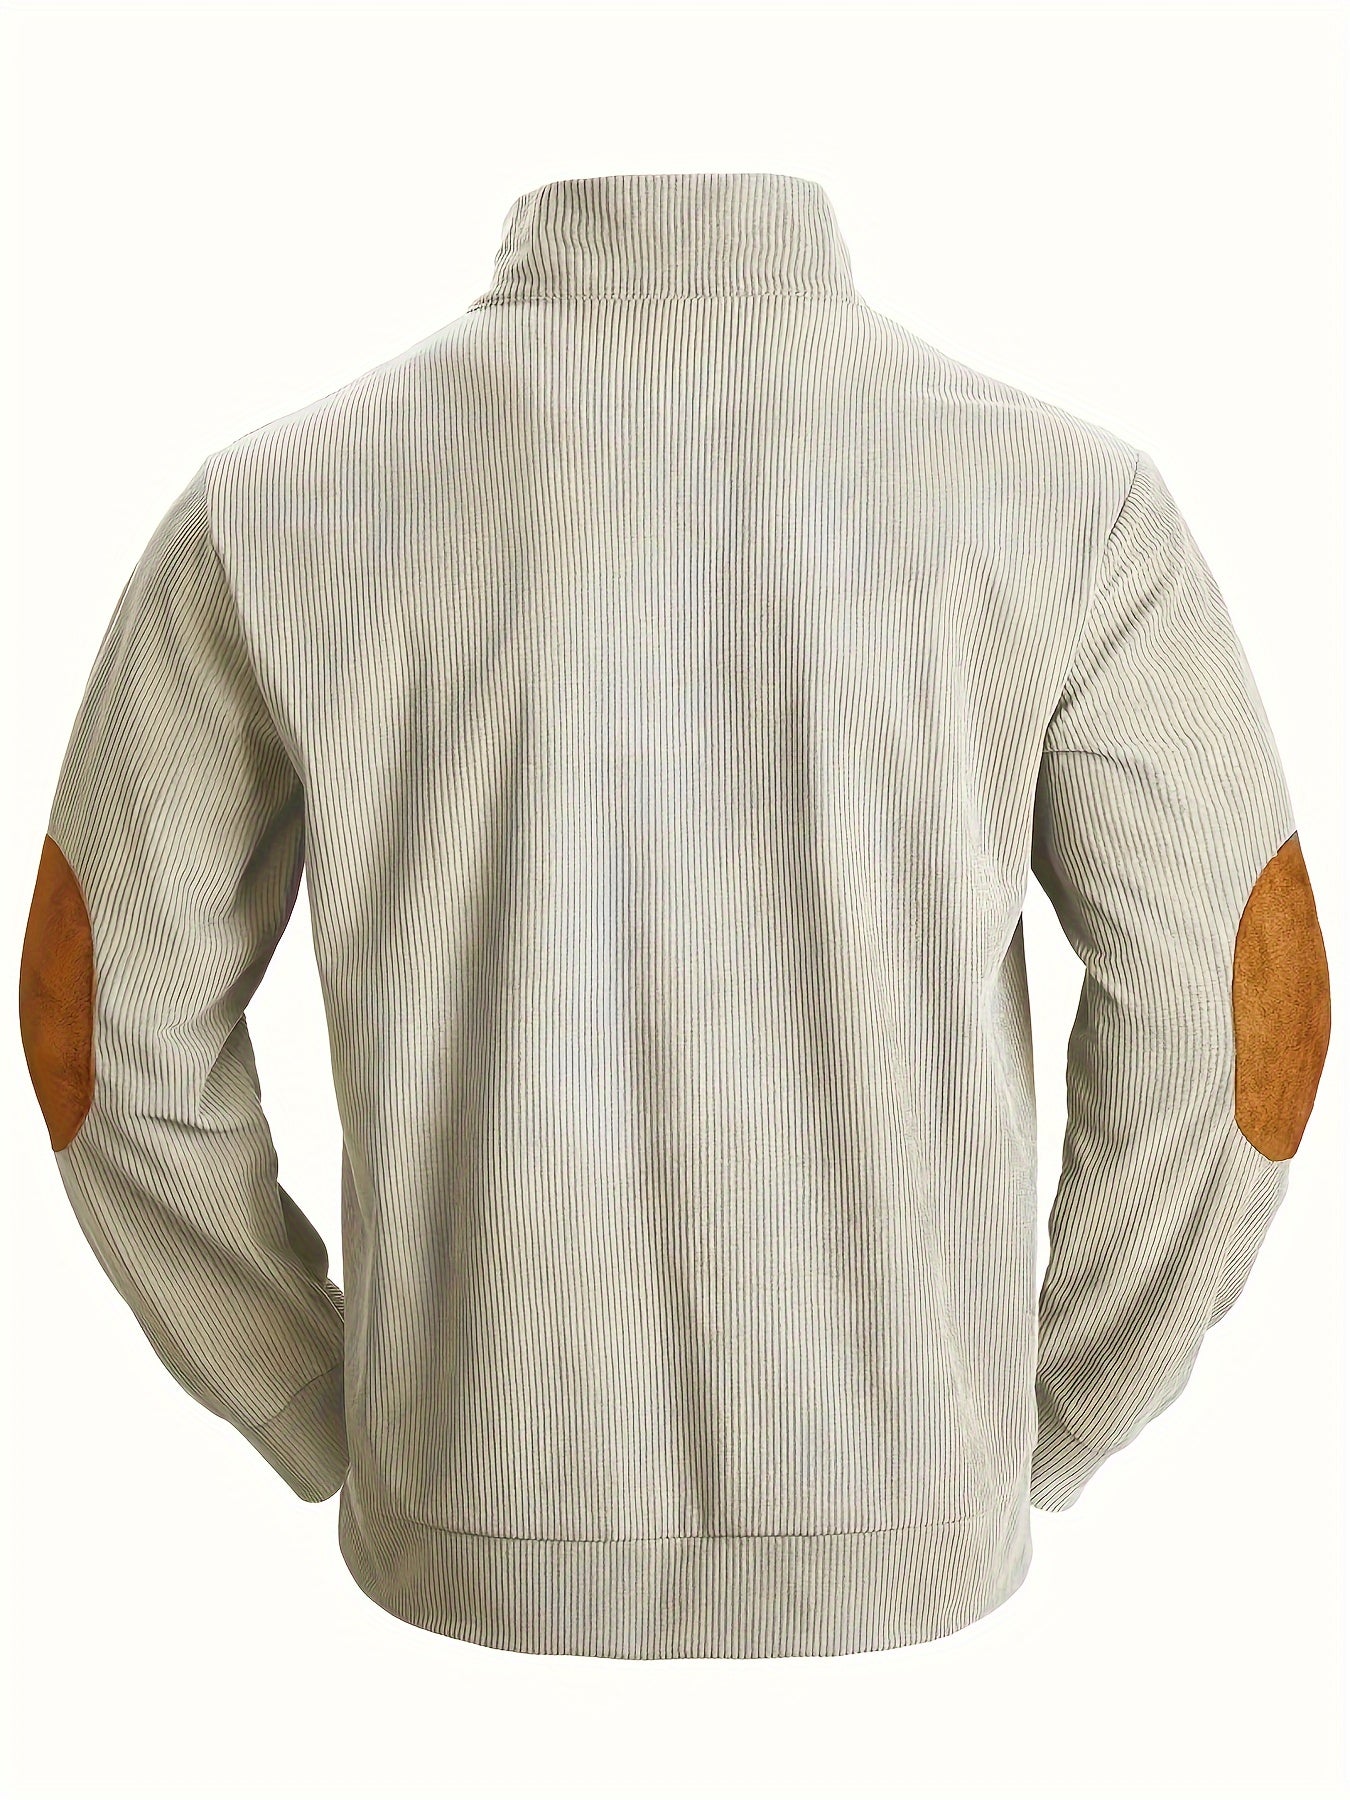 Vintage Style Ribbed Men's Color Block Long Sleeve Turtleneck Henley Shirt, Fall Spring, Outdoor Travel